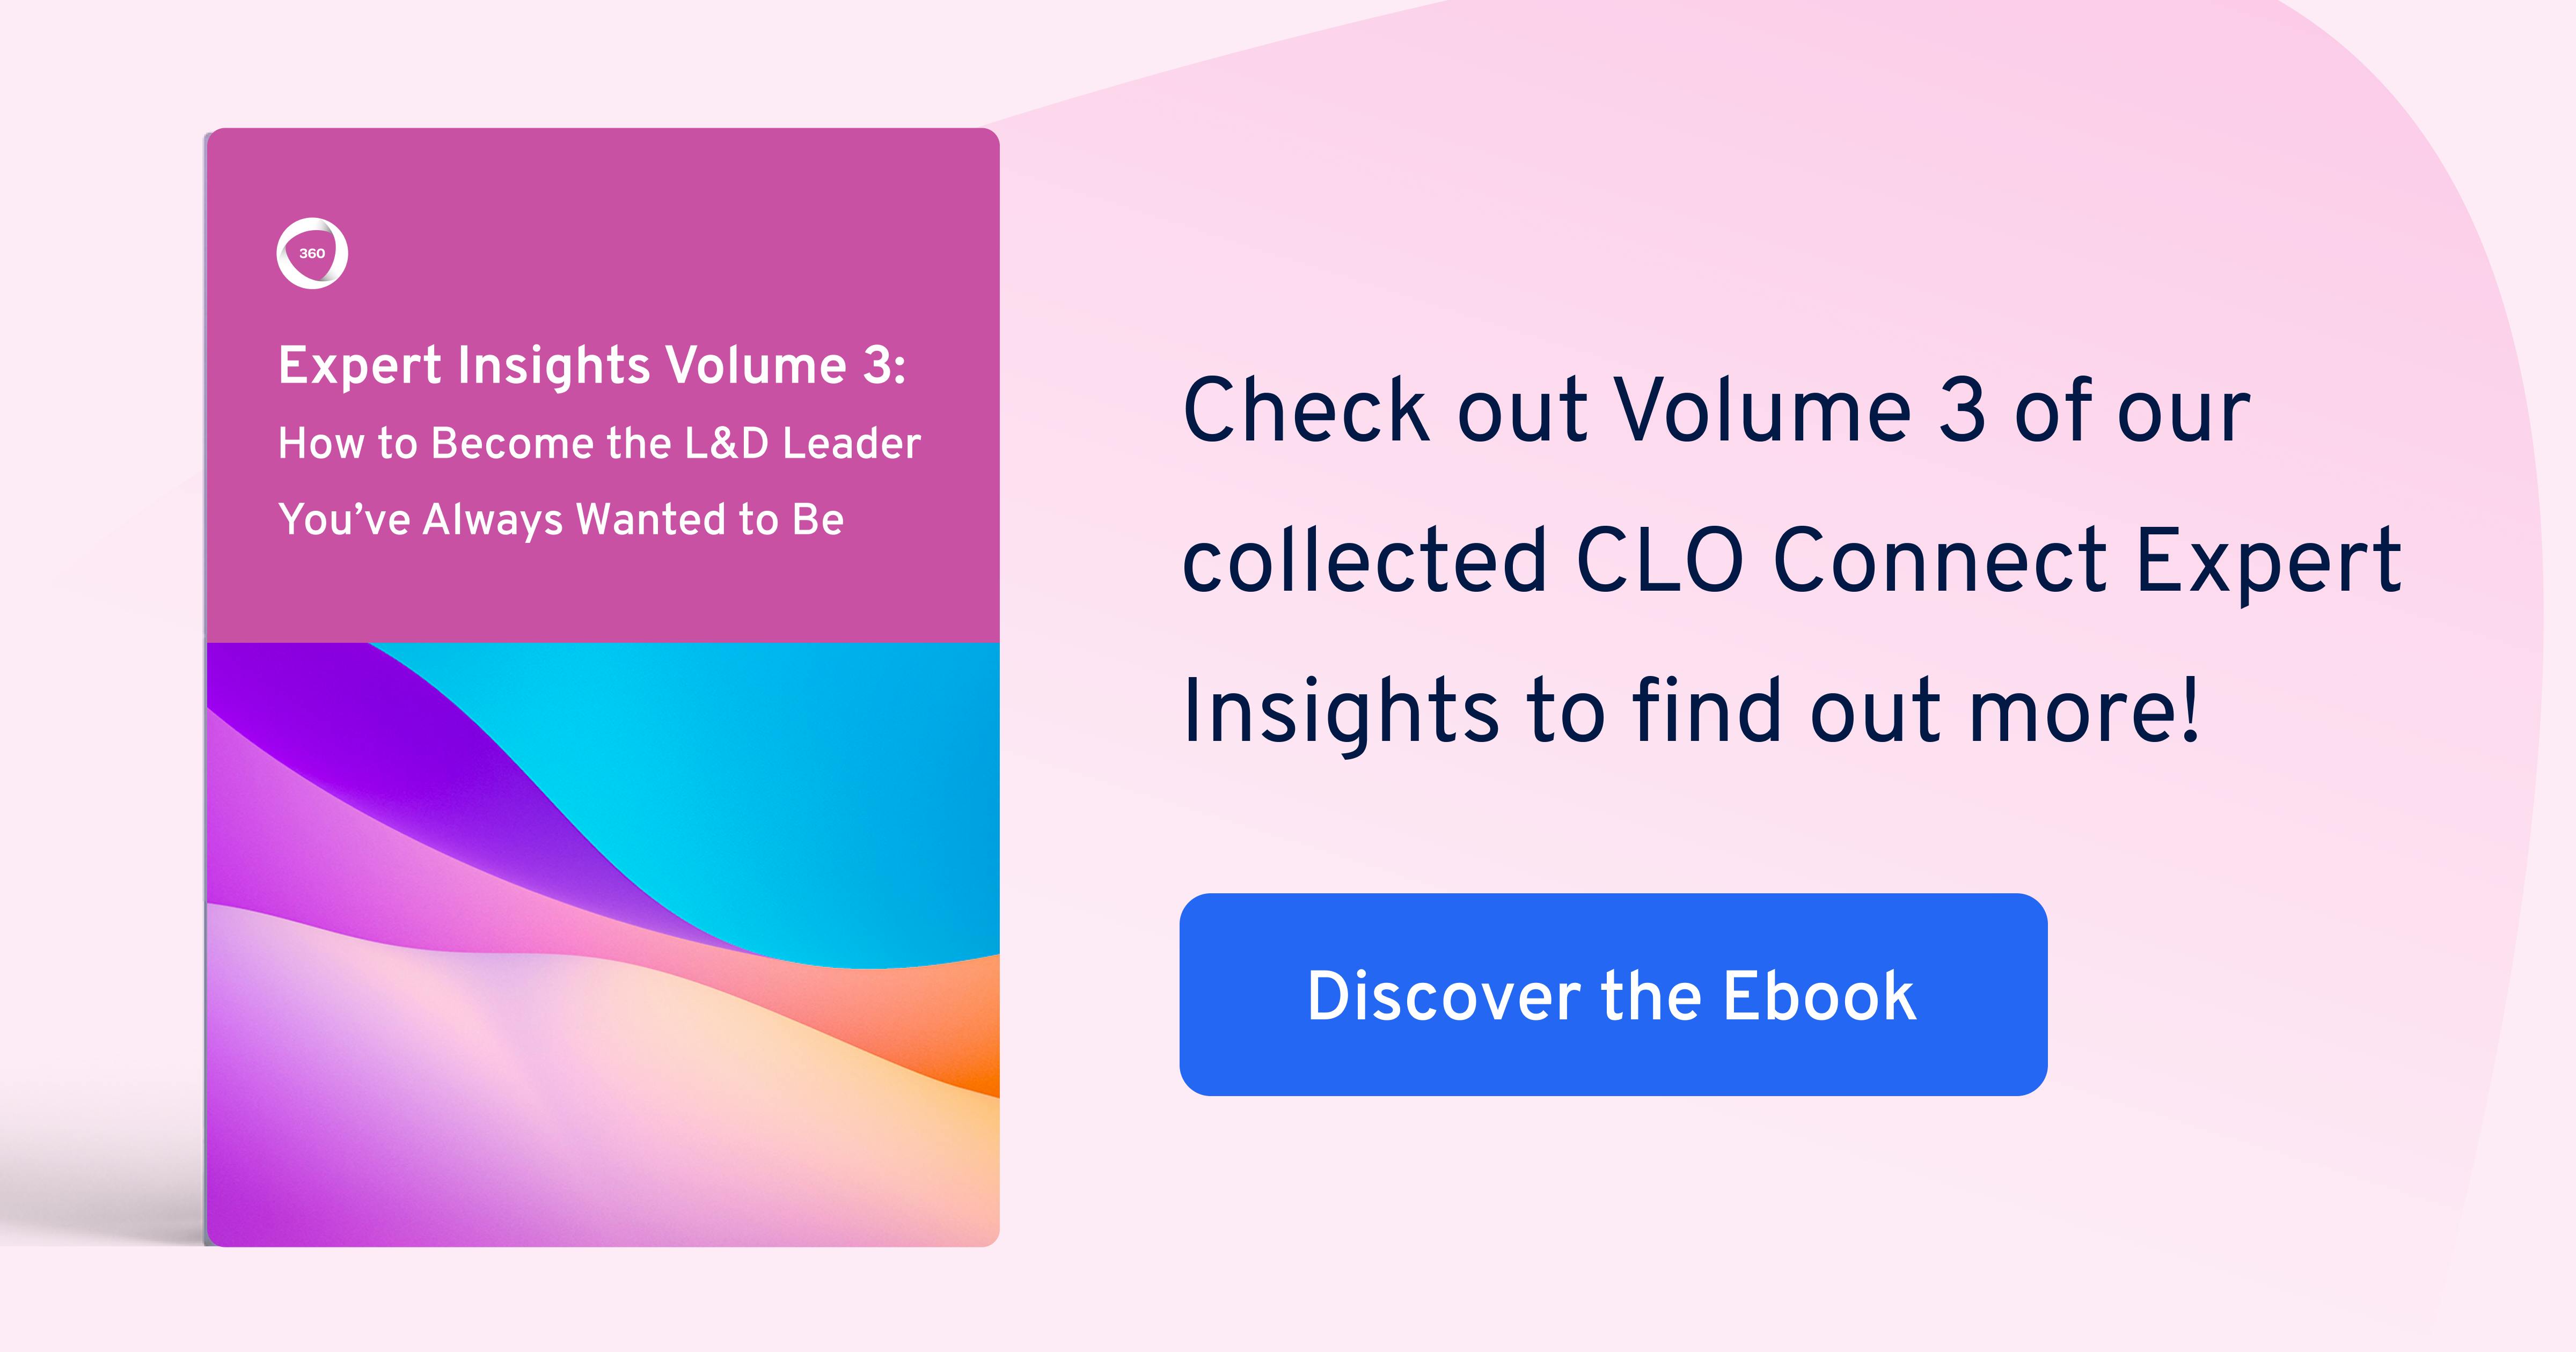 CLO Connect Expert Insights